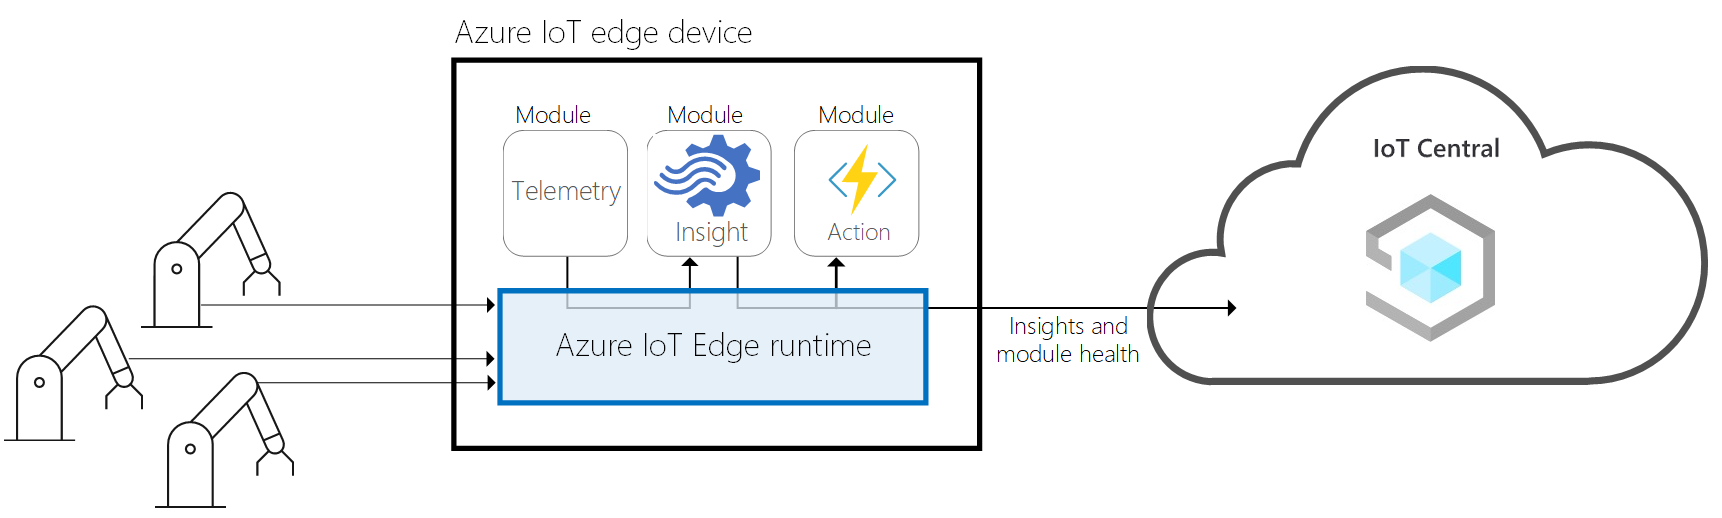 Azure IoT Central with Azure IoT Edge